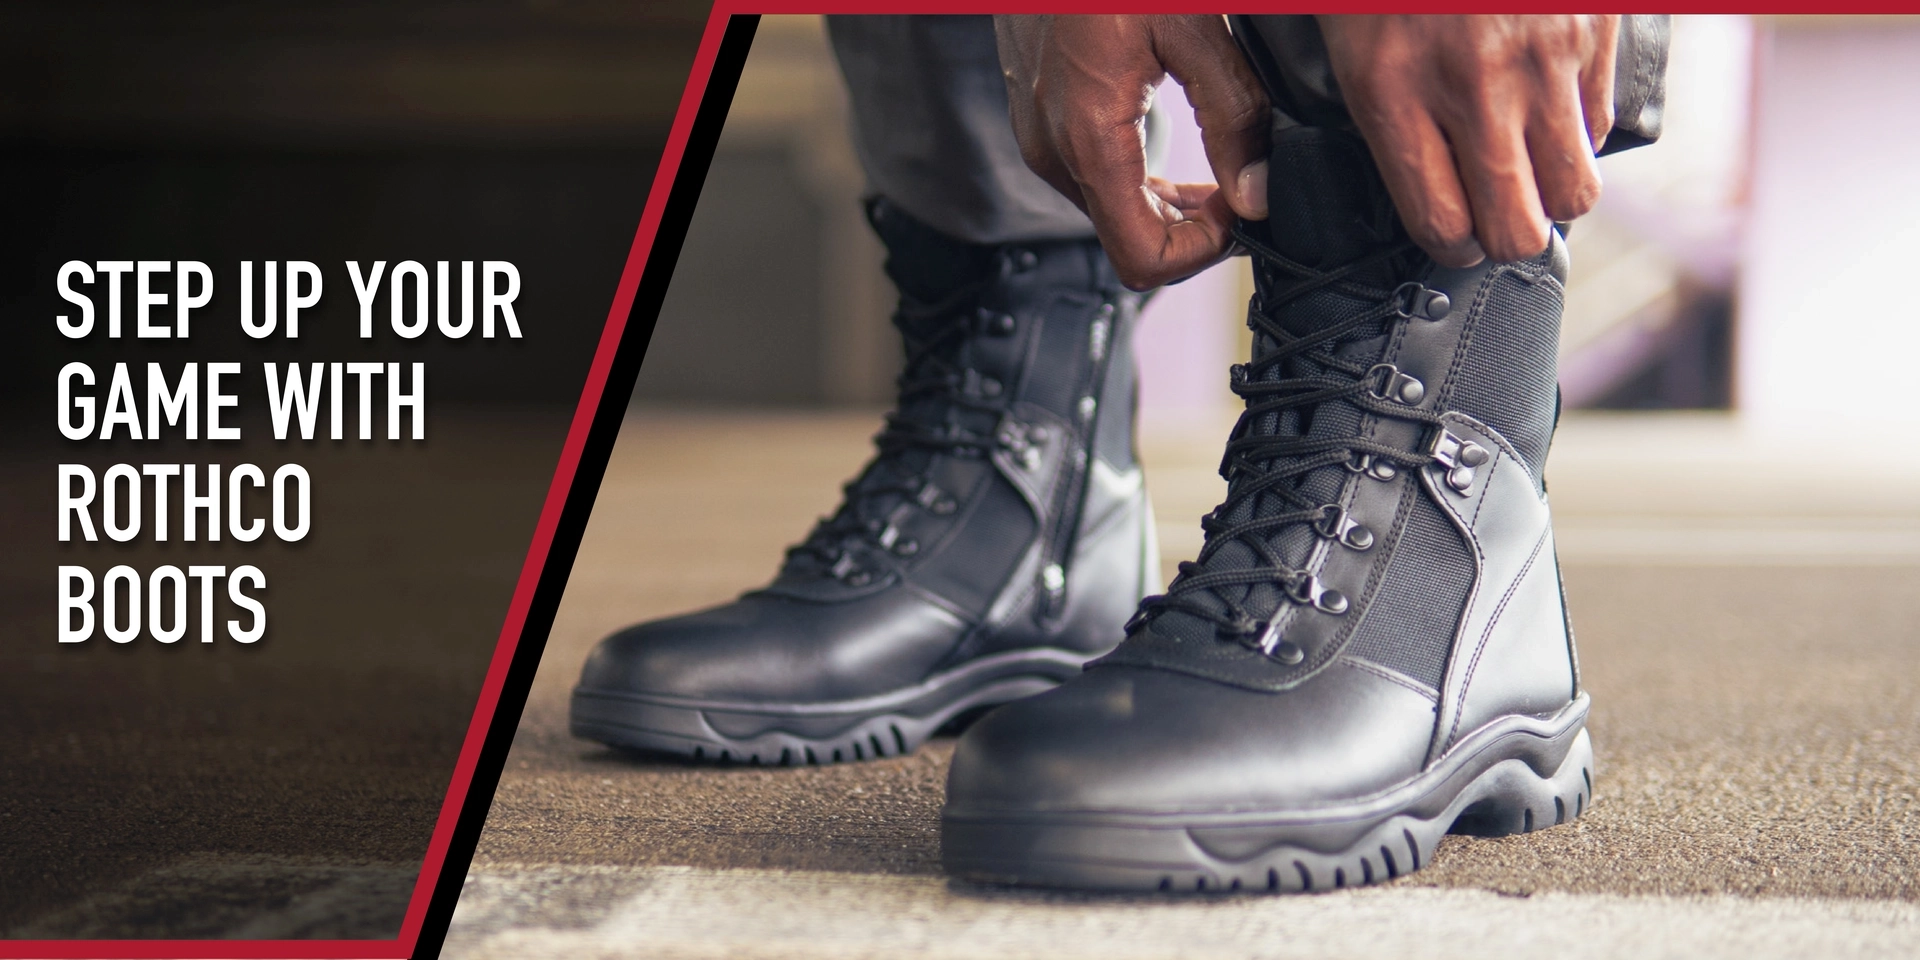 Step up your game with rothco boots.